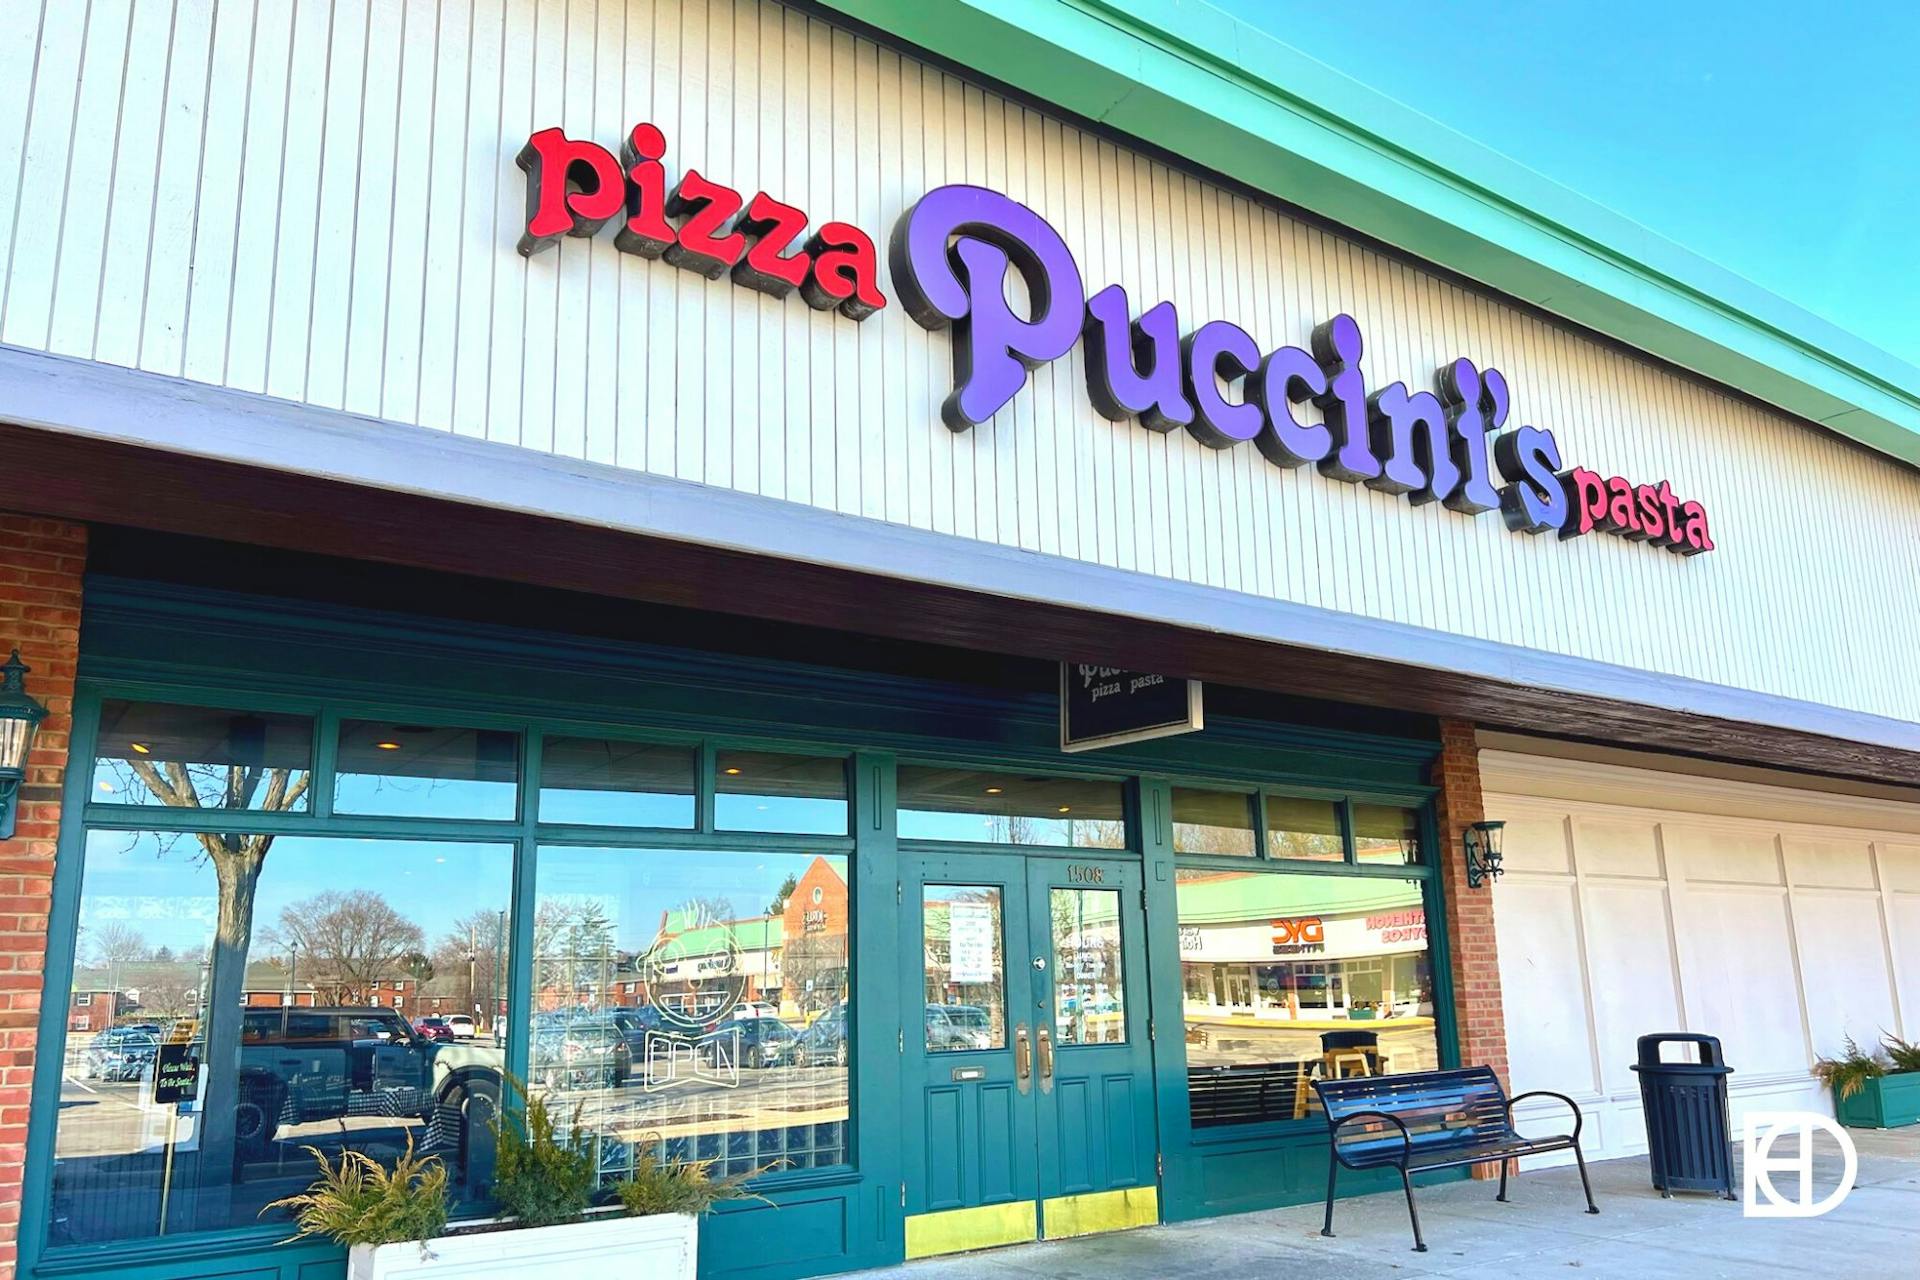 Exterior photo of Puccini's Pizza Pasta in Clearwater